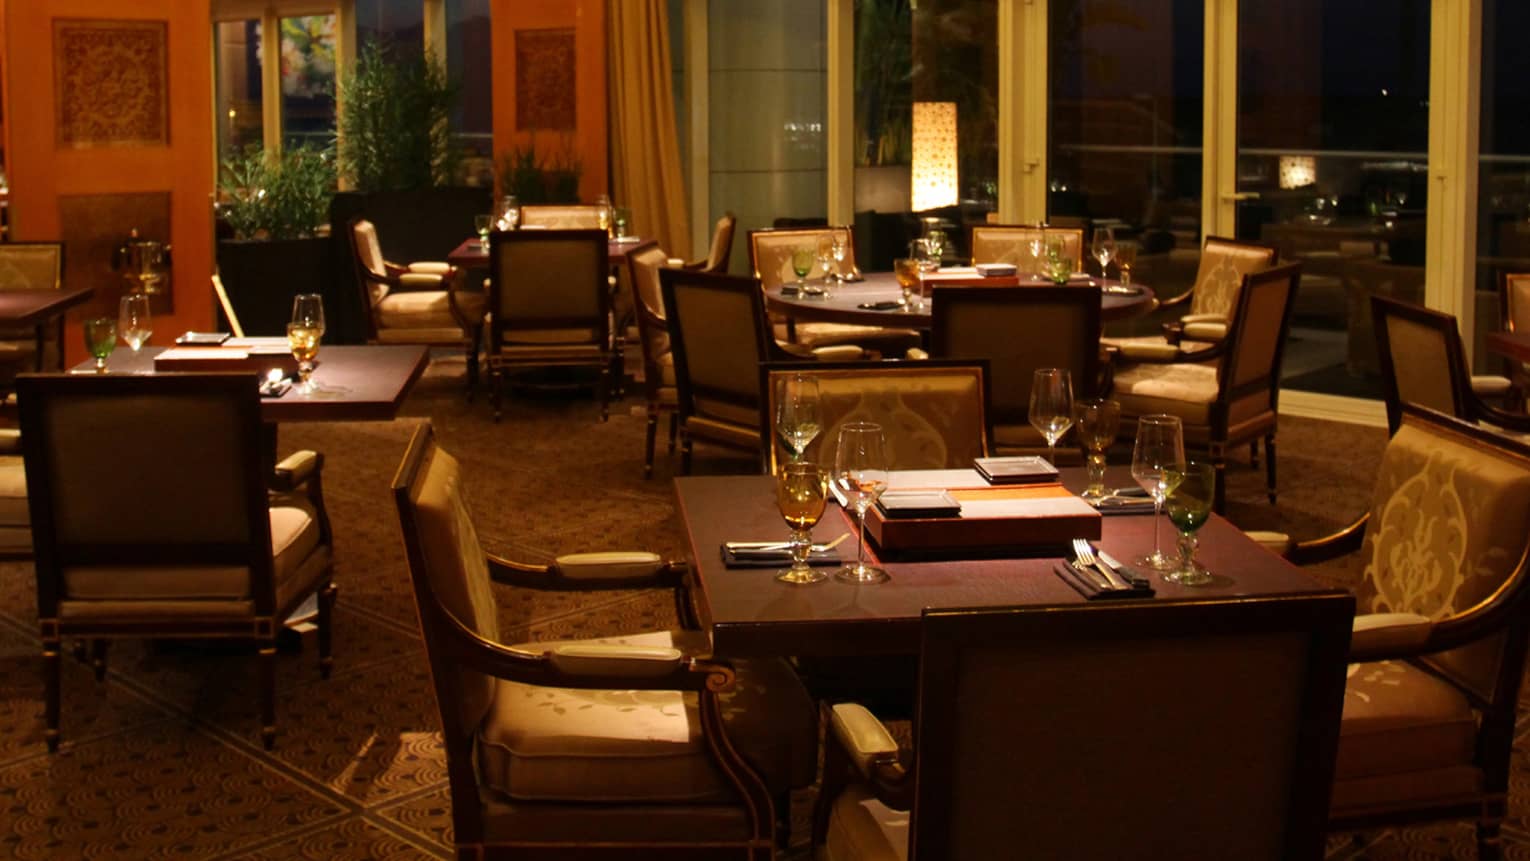 Dimly lit dining room of restaurant, brown square tables, each with four arm chairs, windows